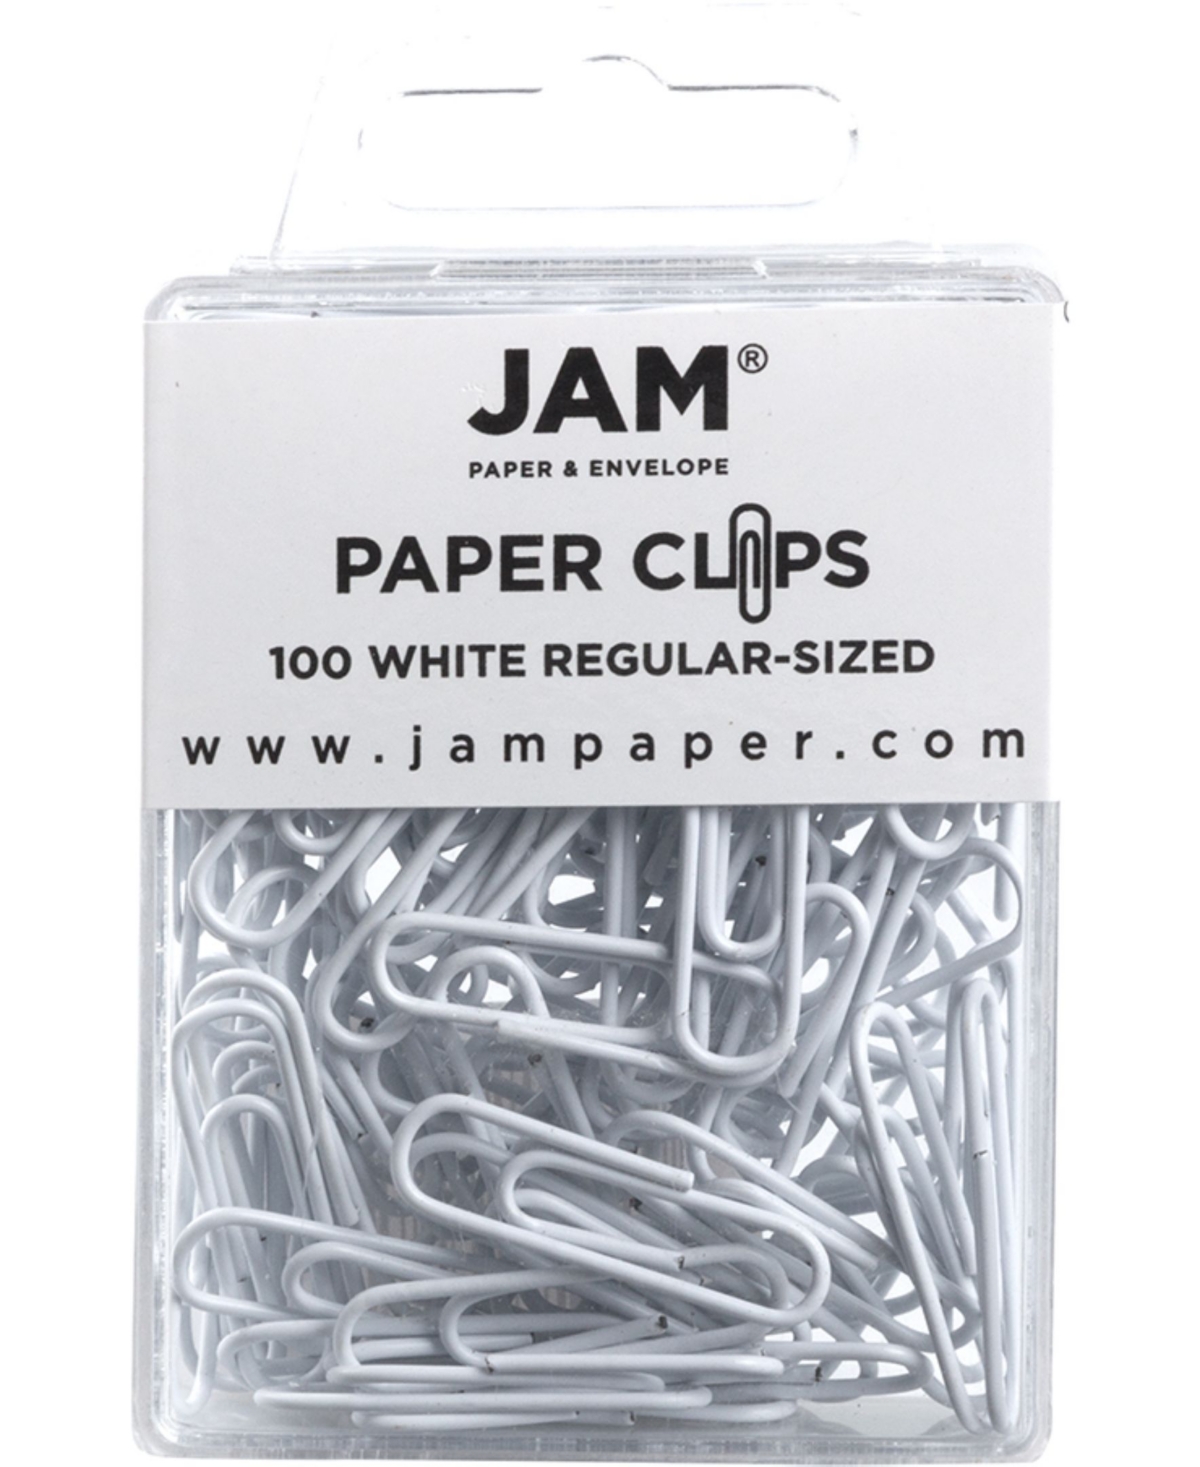 Jam Paper Colorful Standard Paper Clips In White